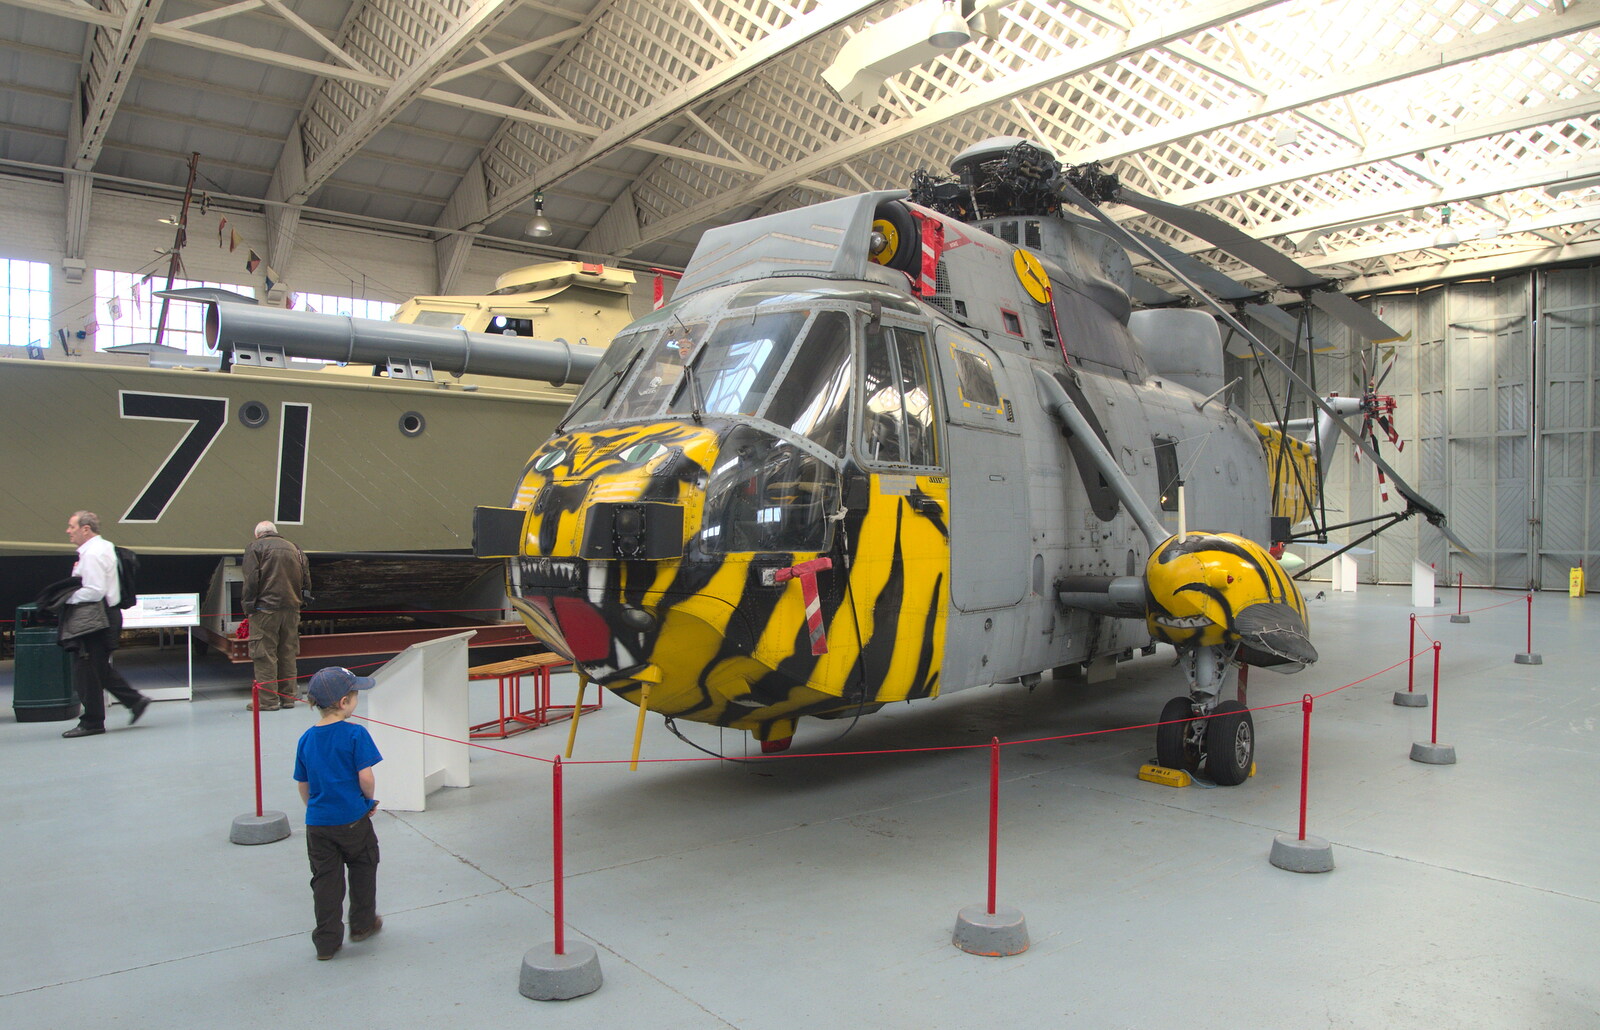 FRed looks at a Sea King helicopter from A Day Out at Duxford, Cambridgeshire - 9th March 2014